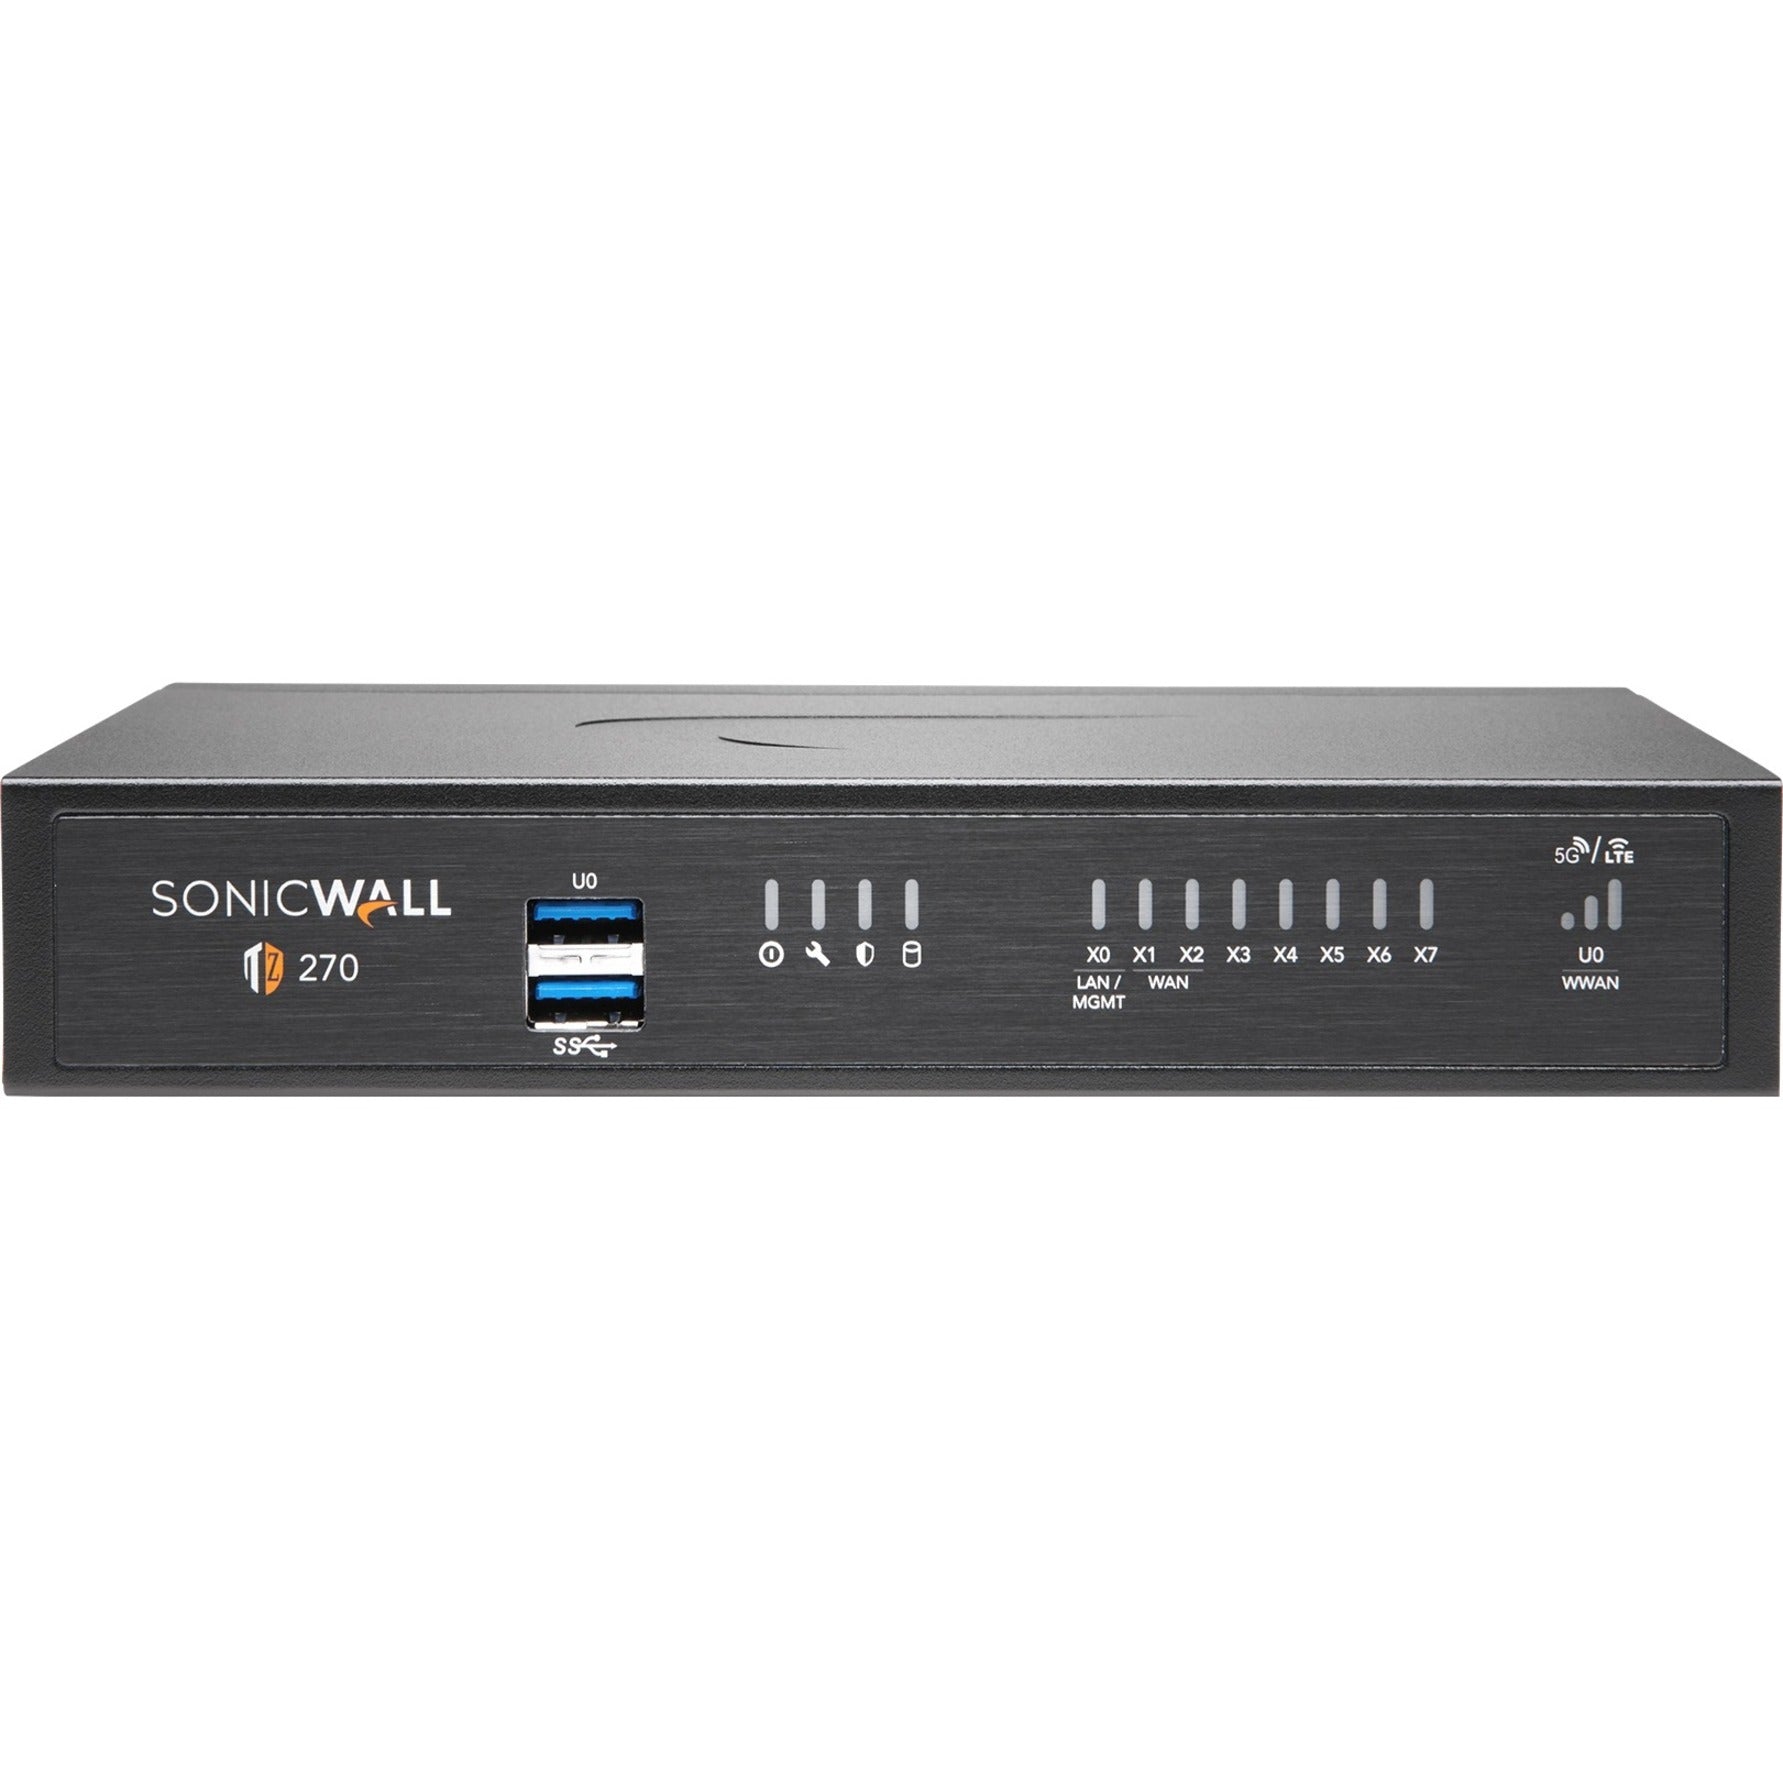 SonicWall 02-SSC-7305 TZ270 Network Security/Firewall Appliance, TotalSecure Threat Edition, 8 Ports, Gigabit Ethernet